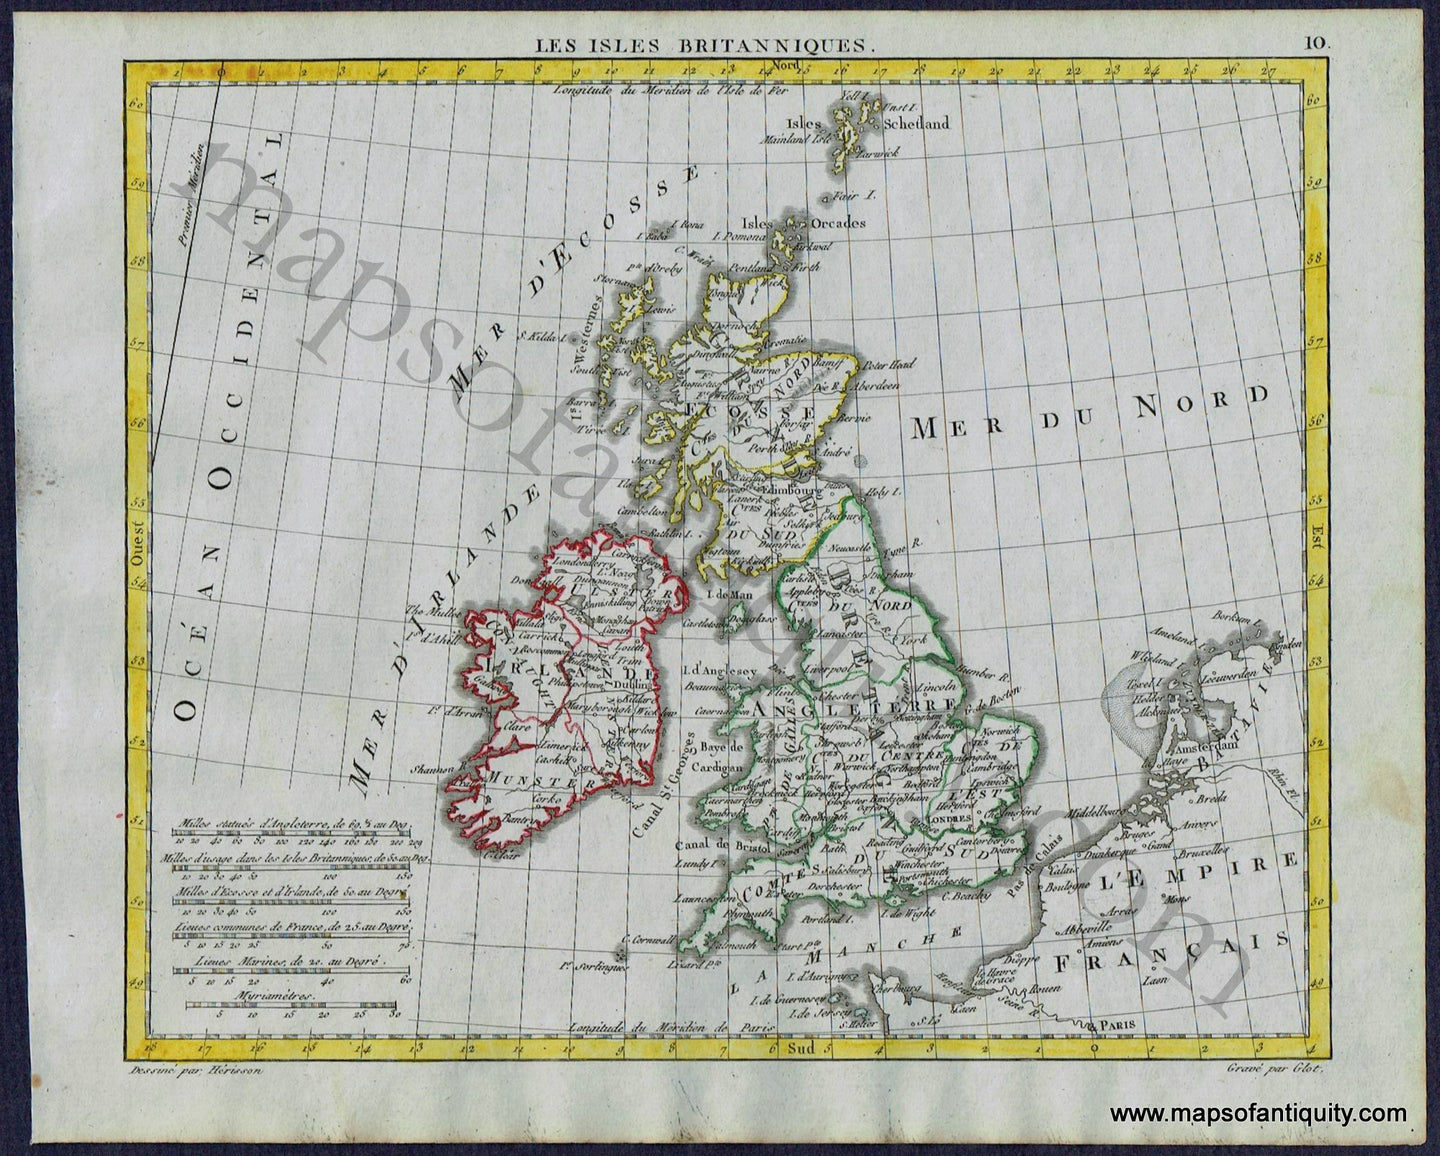 Antique-Map-British-Isles-UK-United-Kingdom-Les-Isles-Britanniques-Herrison-French-1806-1800s-Early-19th-Century-Maps-of-Antiquity